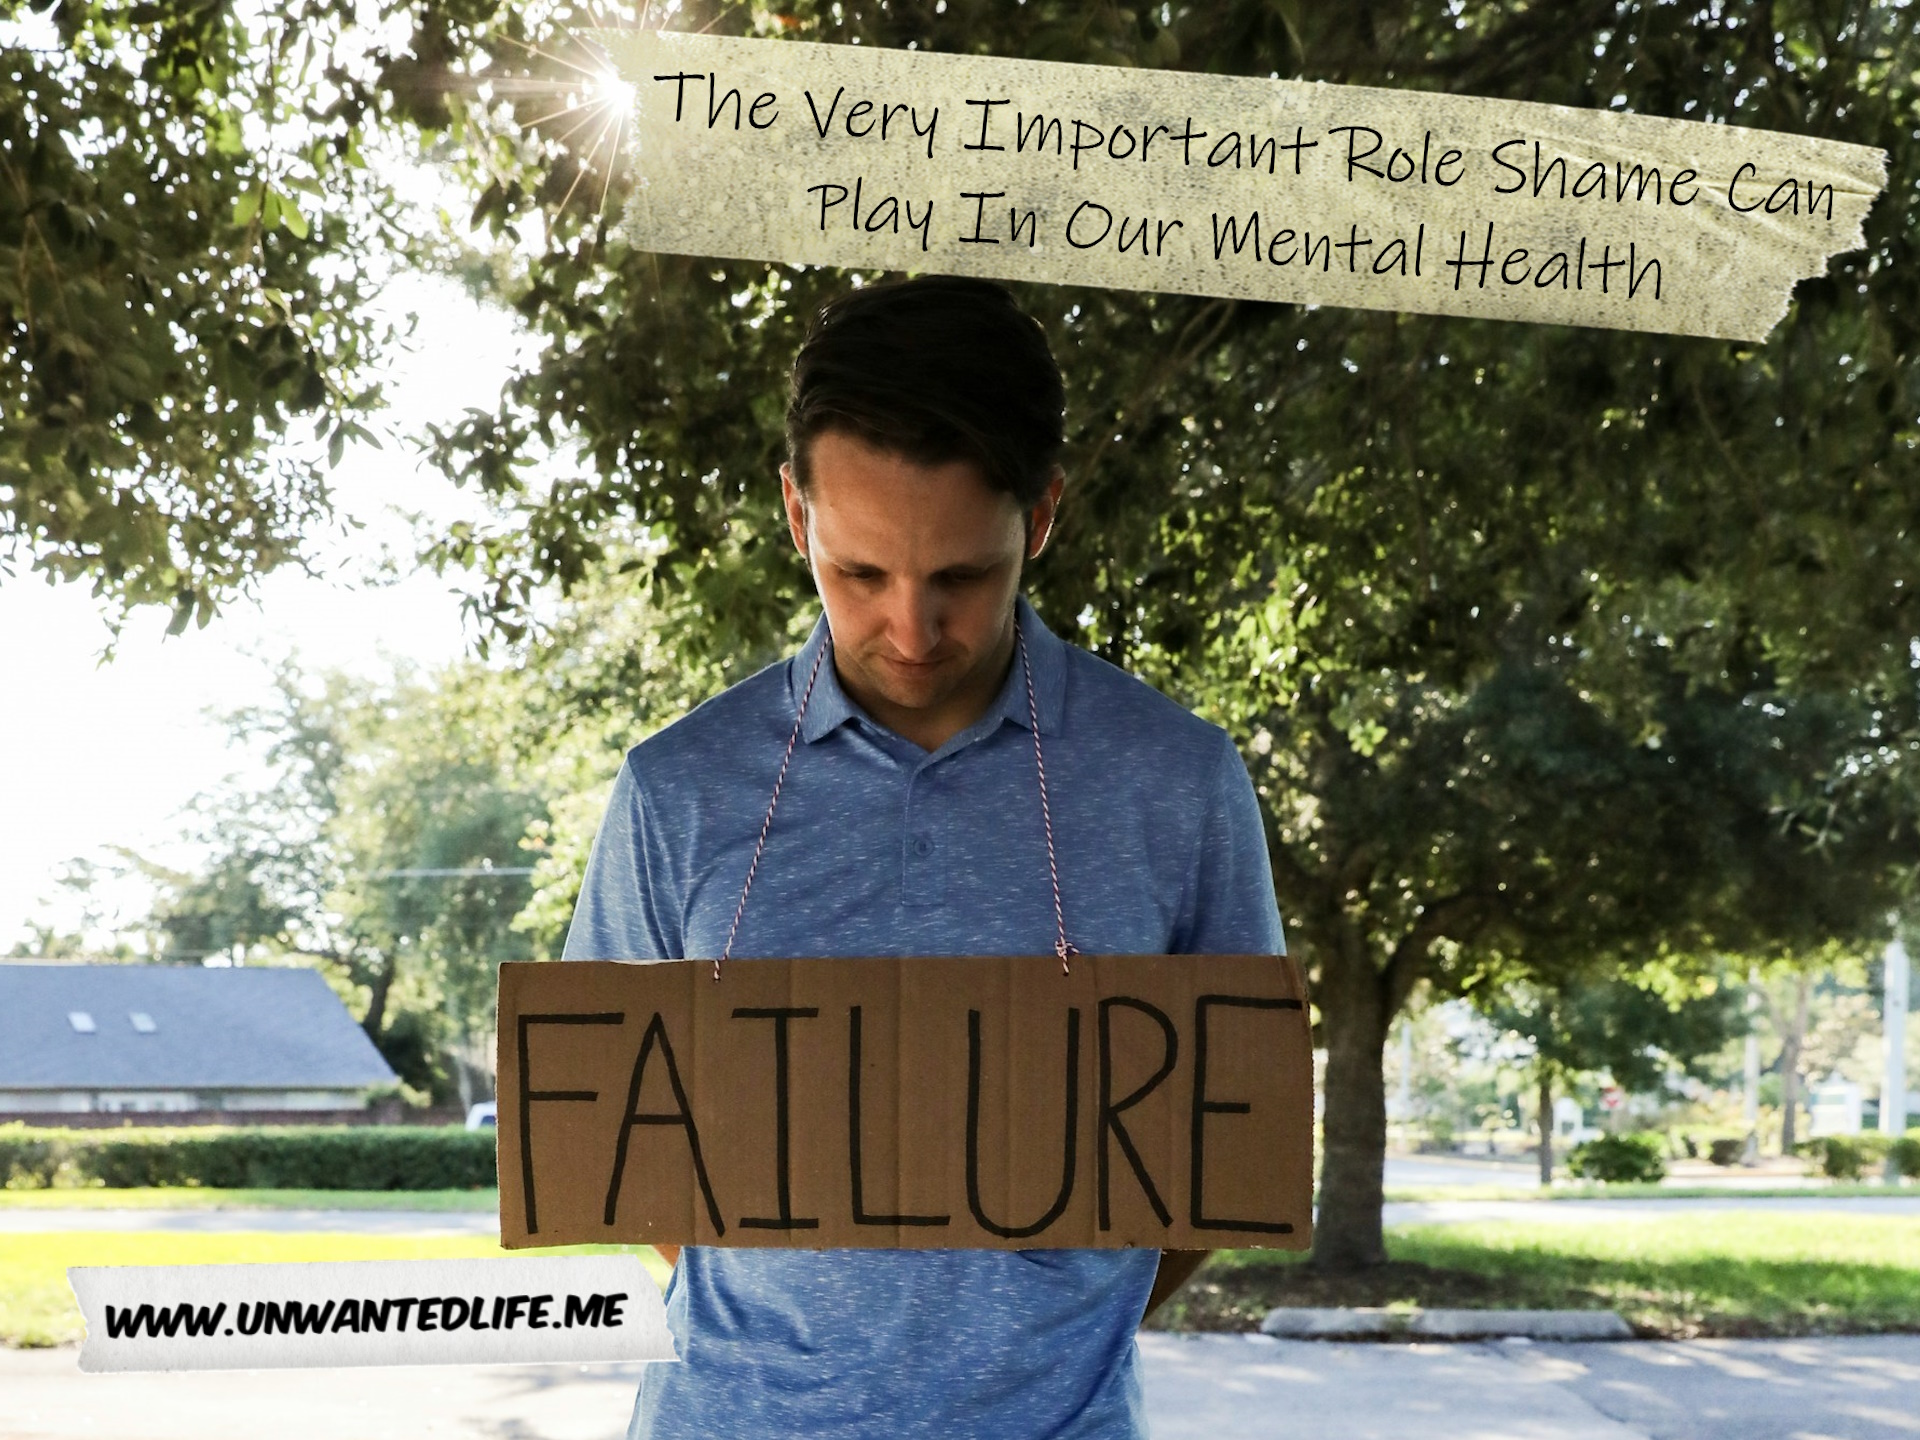 A photo of a man wearing a sign that says "Failure" to represent the topic of the article - The Very Important Role Shame Can Play In Our Mental Health